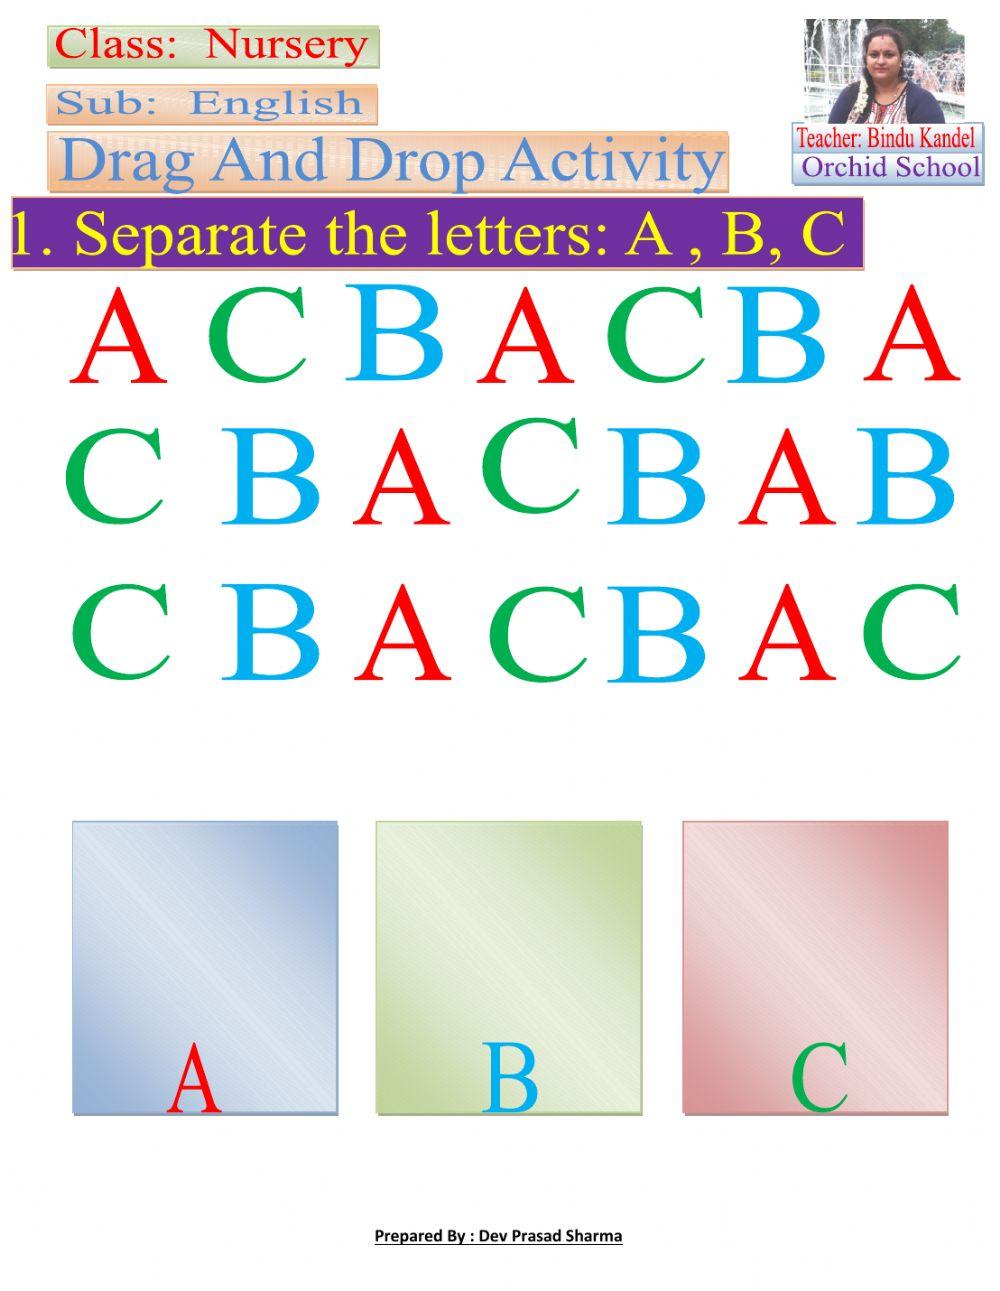 Select letter A,B,C